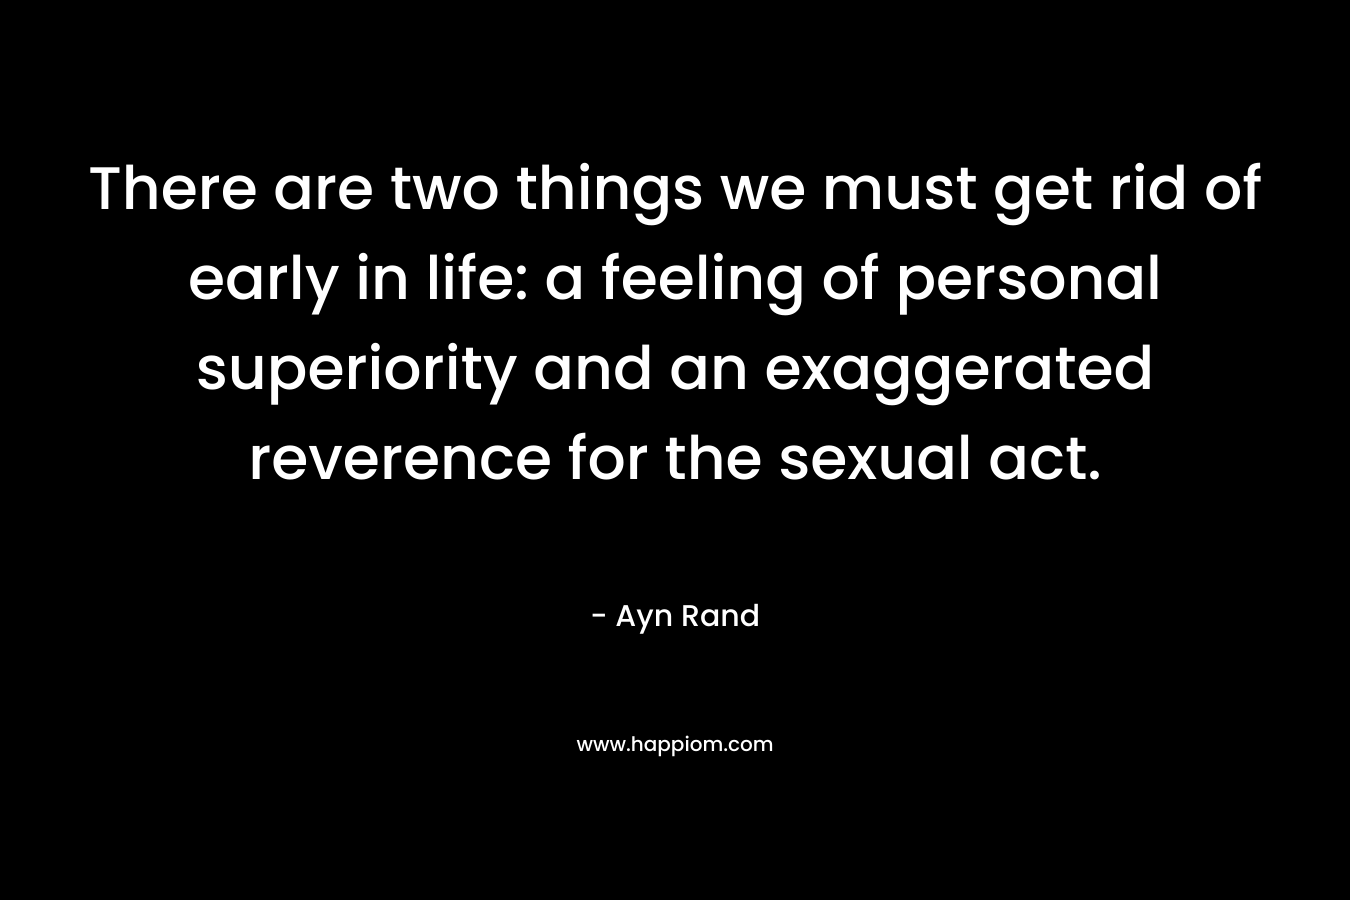 There are two things we must get rid of early in life: a feeling of personal superiority and an exaggerated reverence for the sexual act. – Ayn Rand